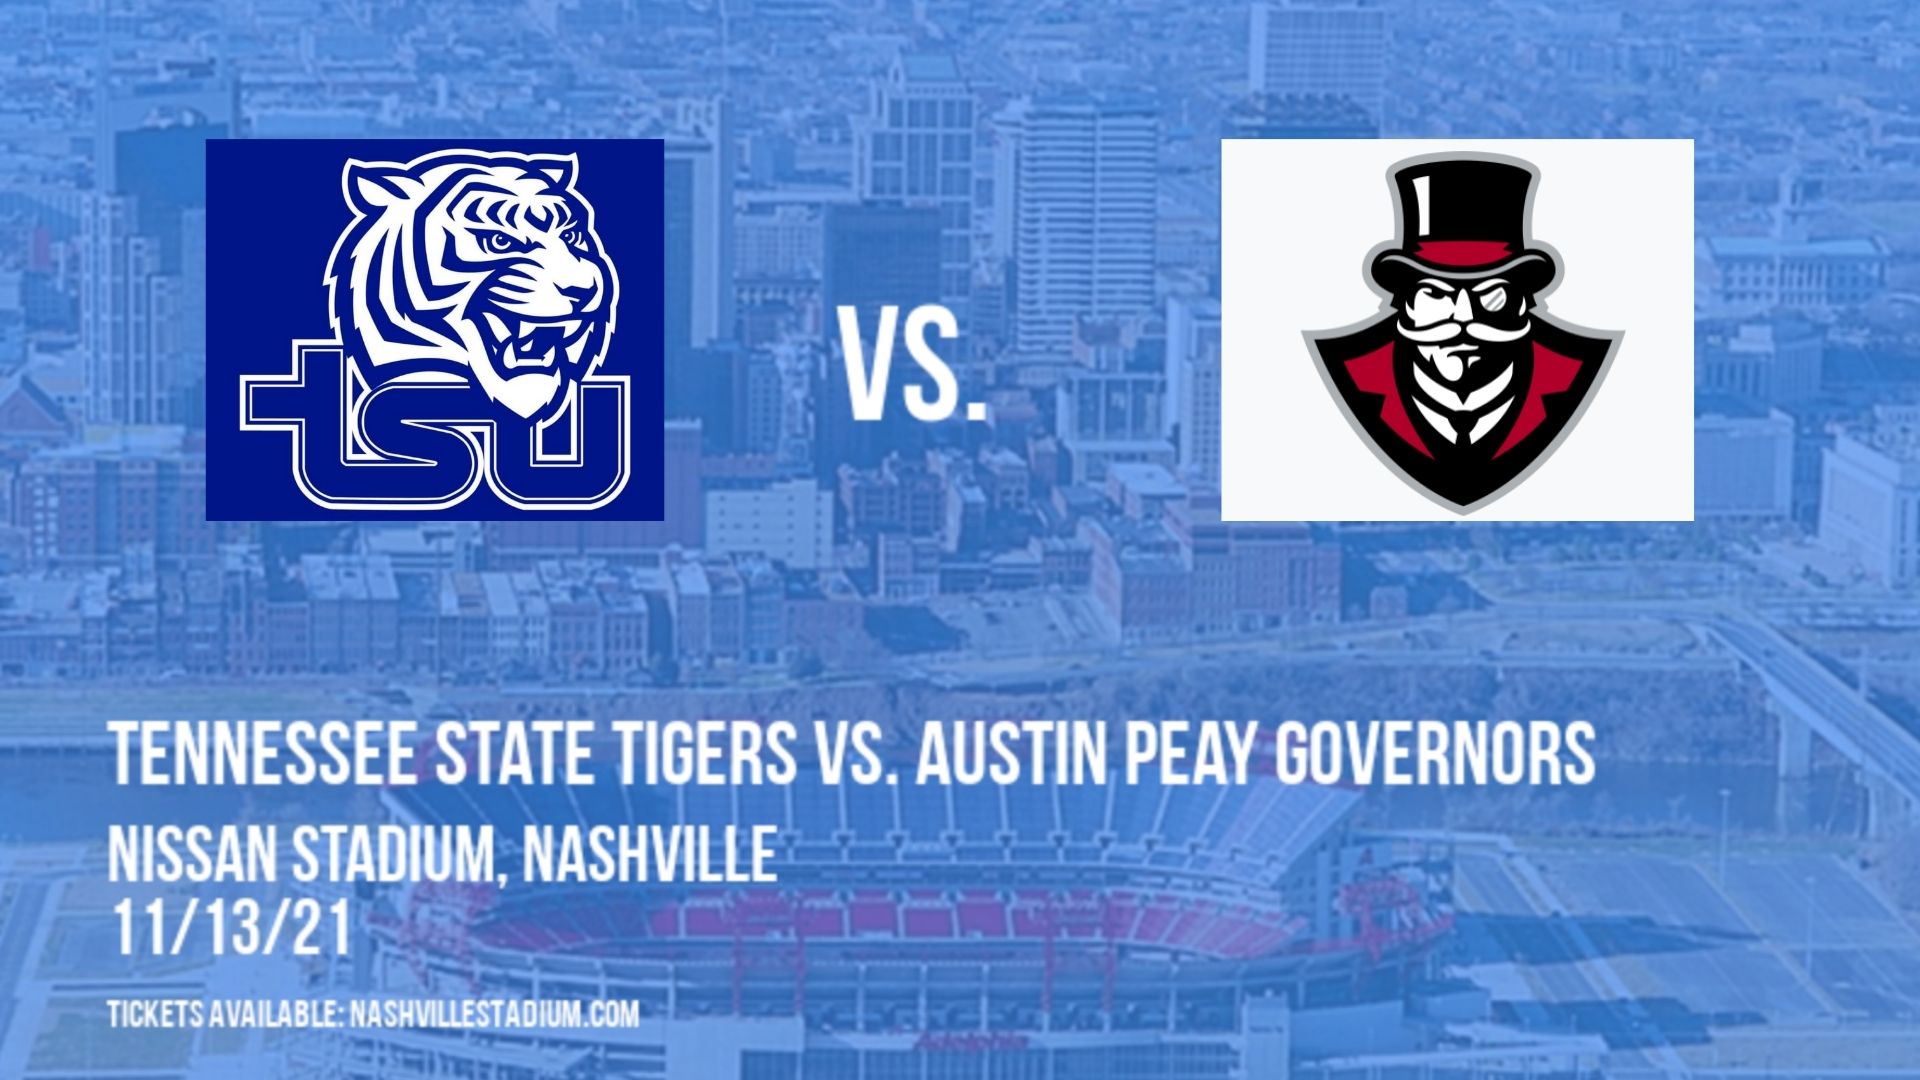 Tennessee State Tigers vs. Austin Peay Governors at Nissan Stadium